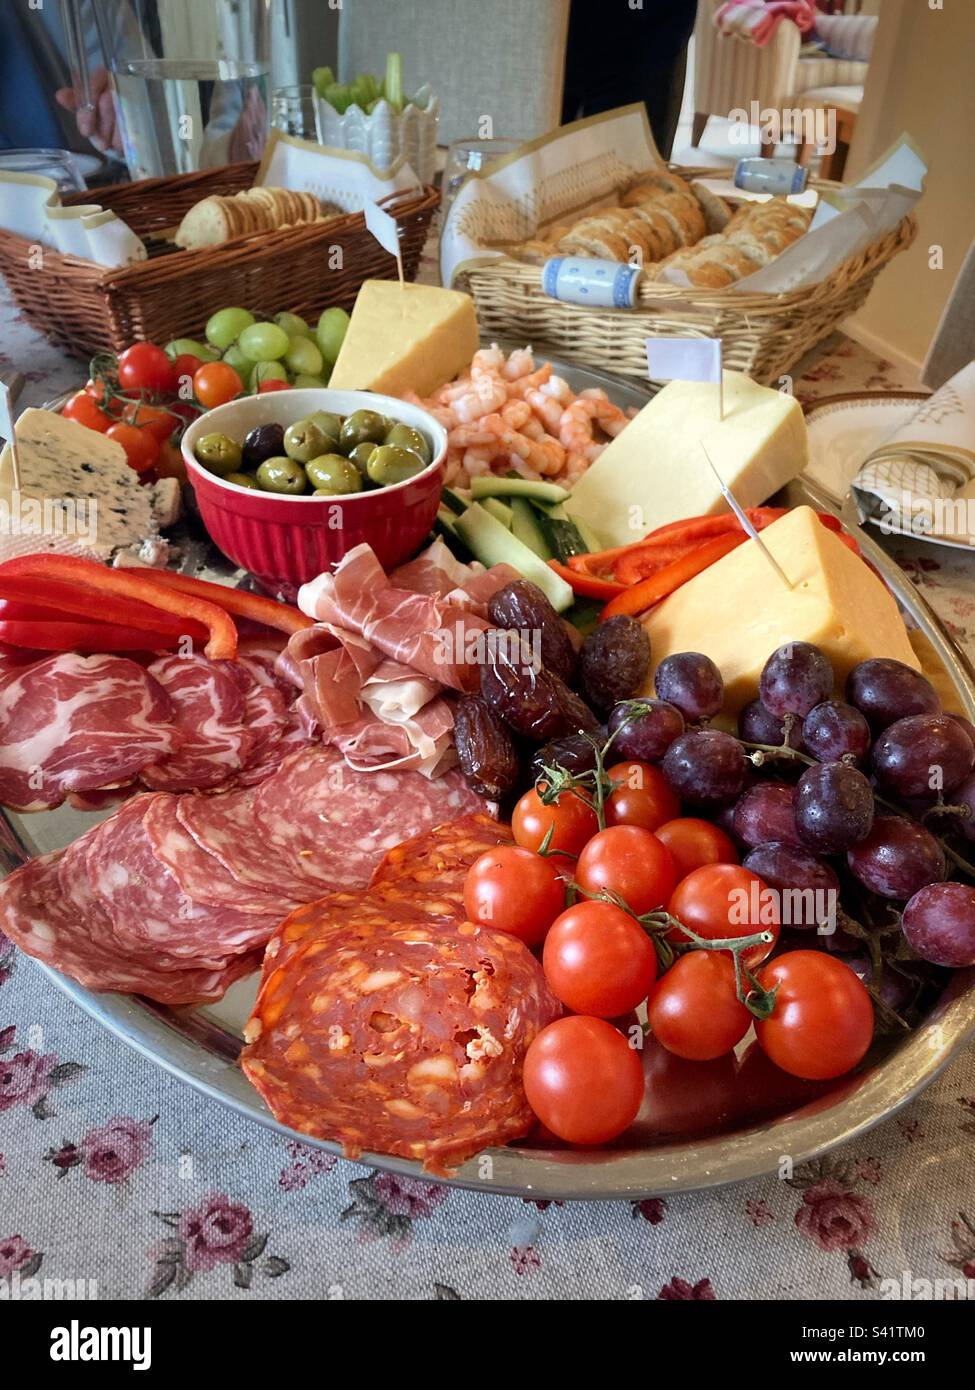 Platter of meats, cheeses, fish, vegetables and fruit Stock Photo